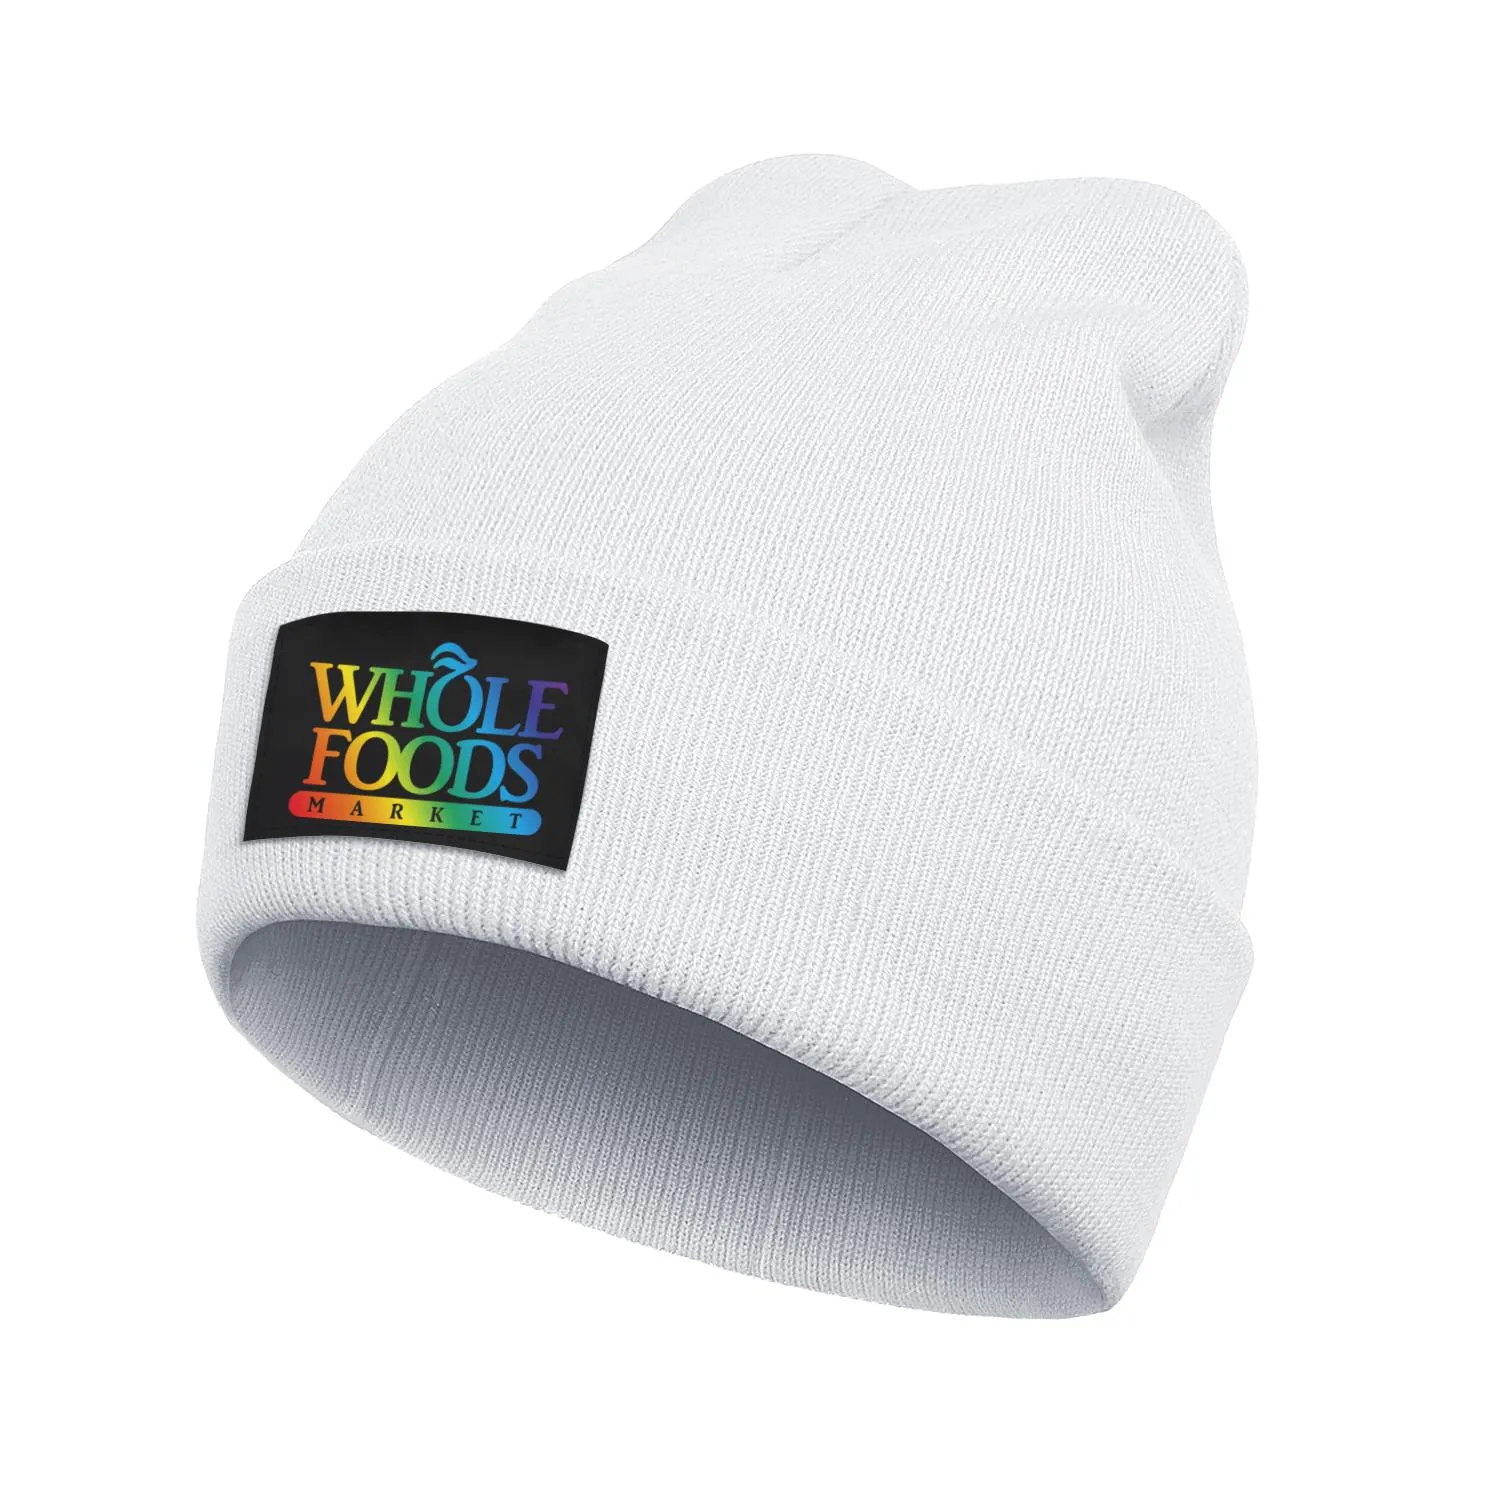 Mode Whole Foods Market Flash Gold Winter Ski Watch Beanie Hat Vintage Hats Organic Food Healthy Pink9110670